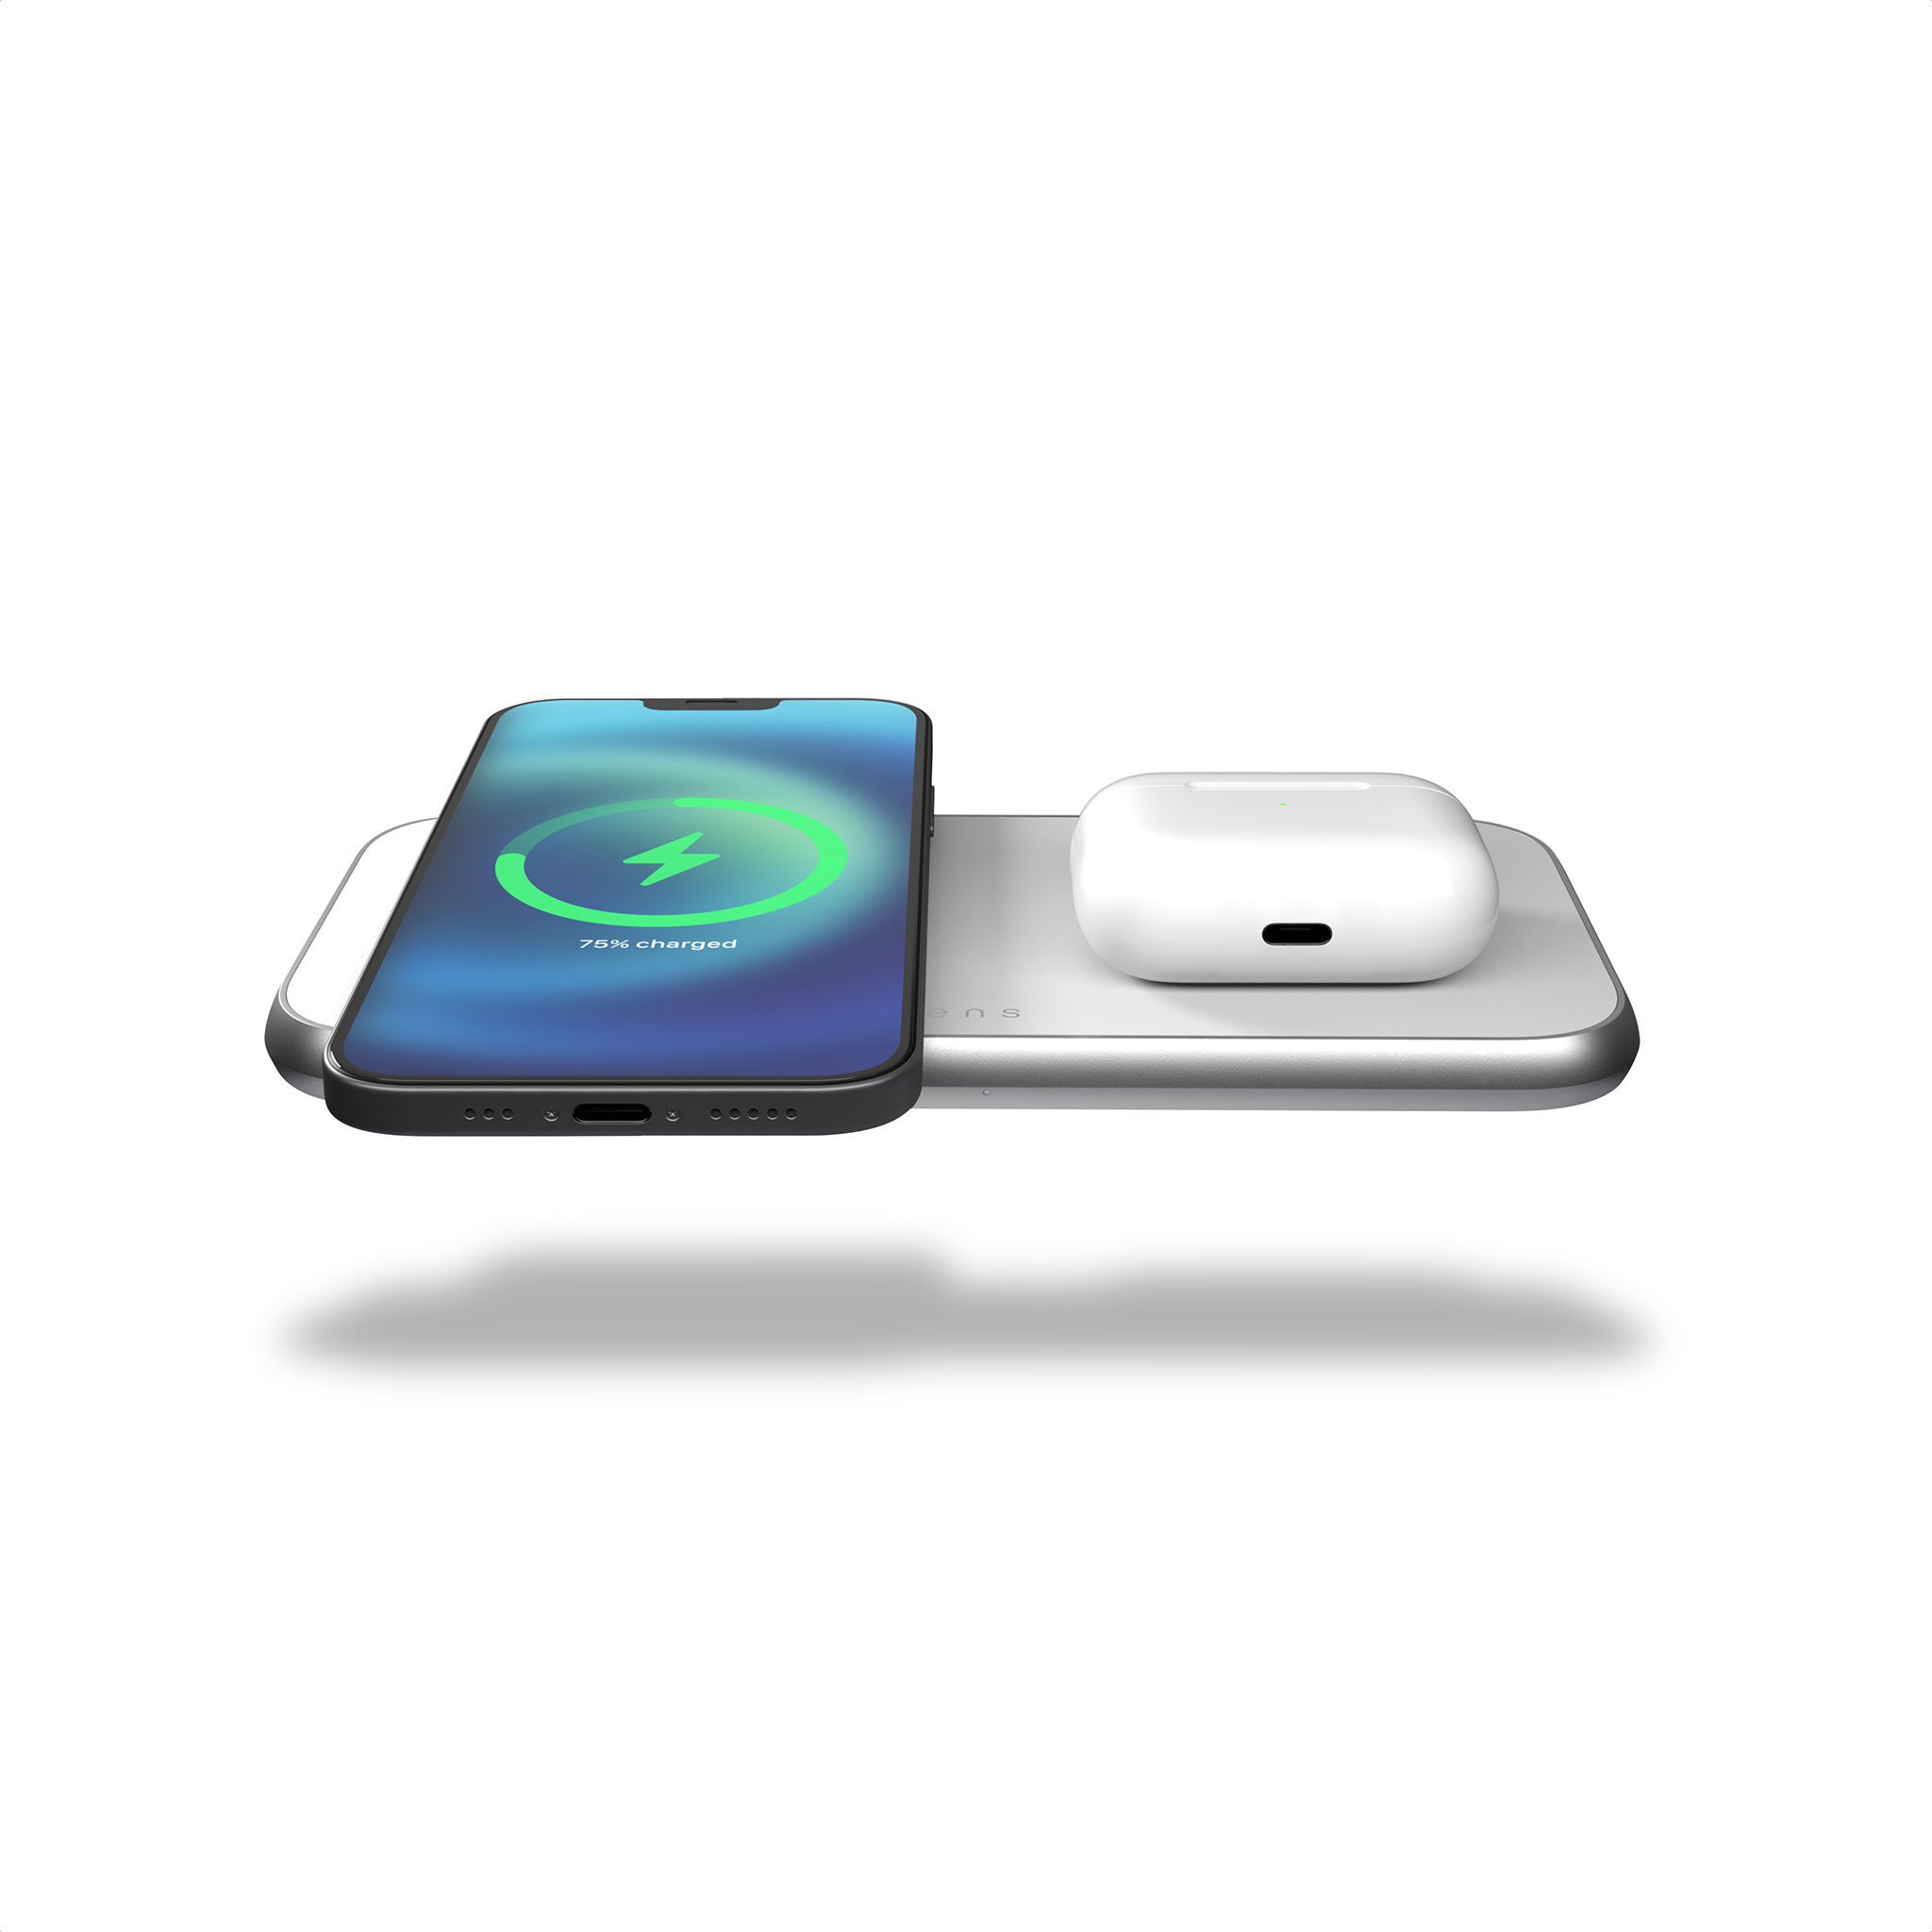 ZEDC16W - Zens 3 in 1 MagSafe Wireless Charger Front Top View with devices